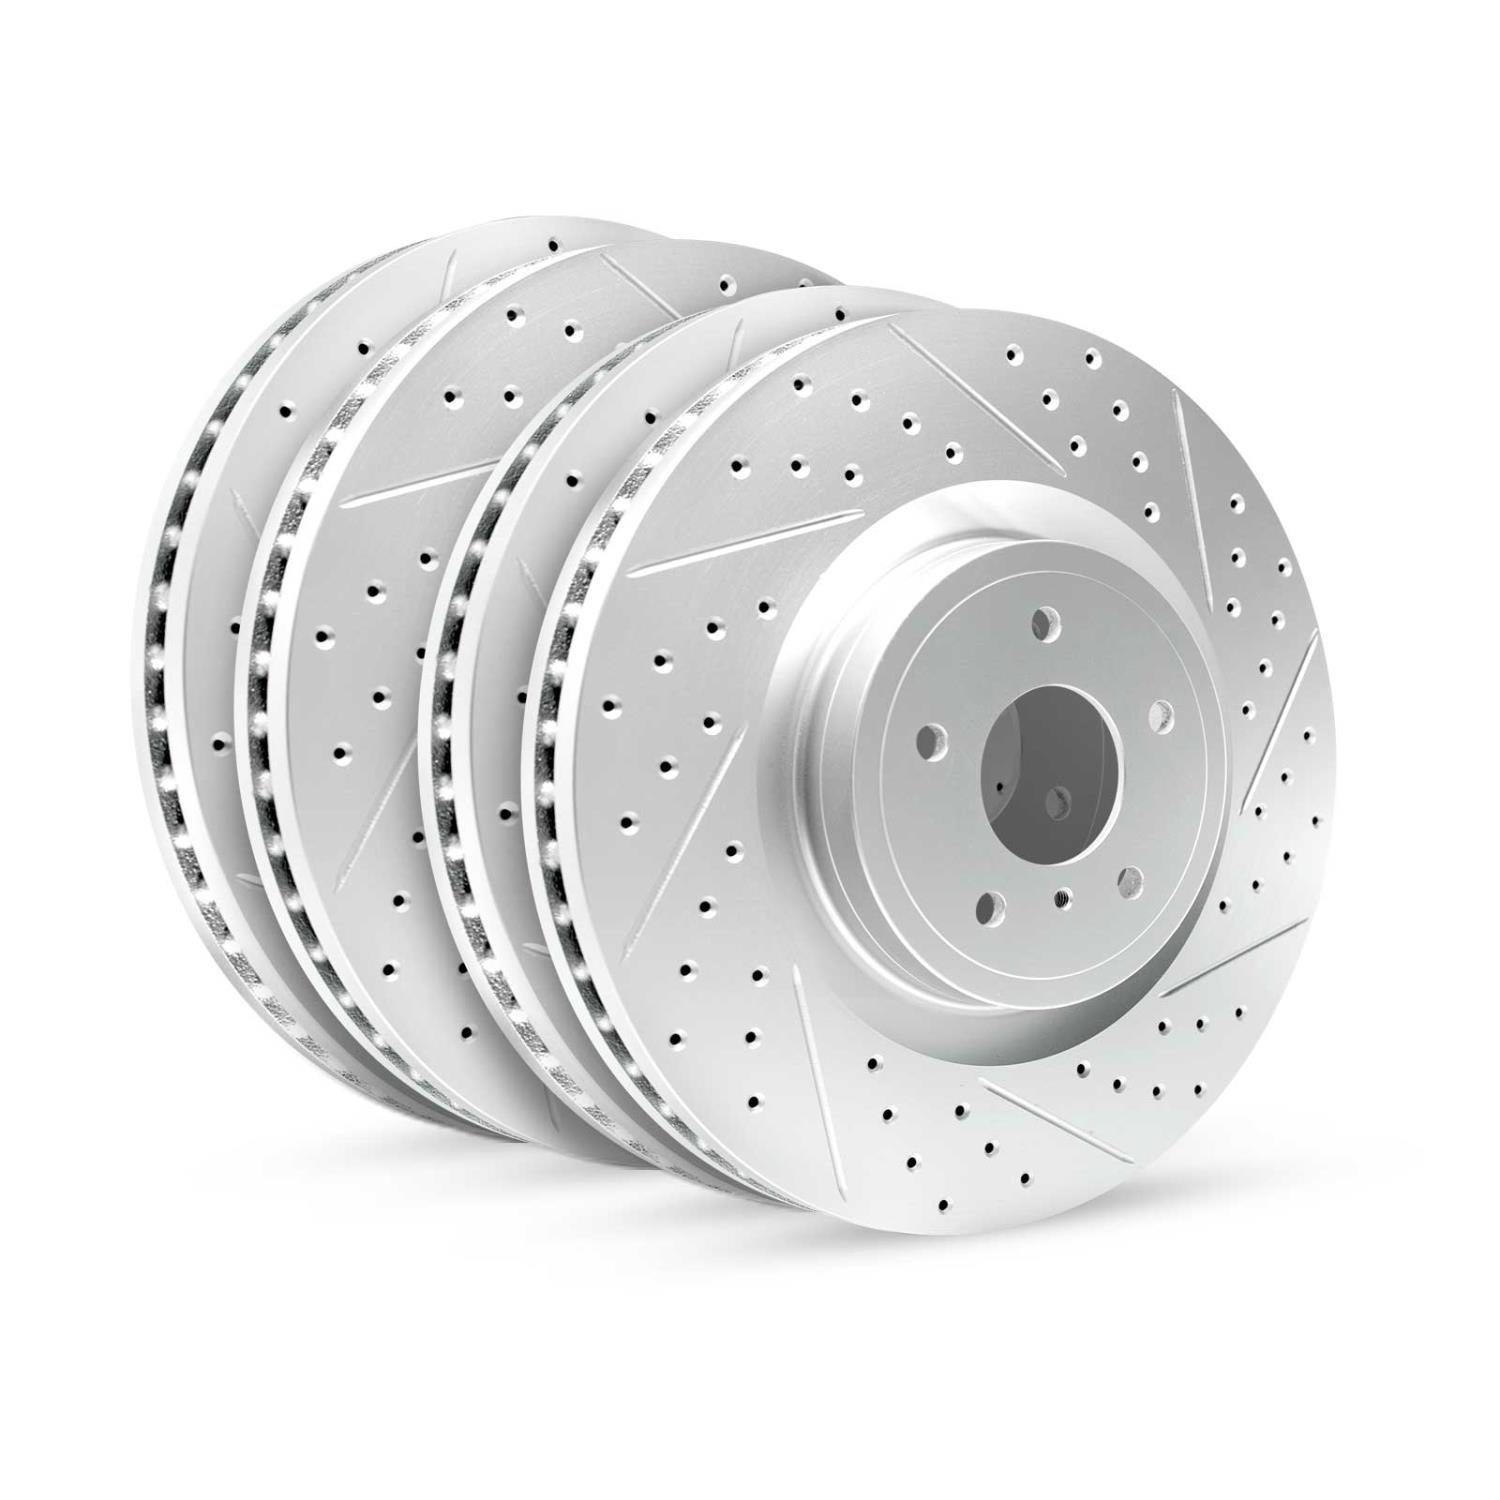 GEO-Carbon Drilled/Slotted Rotors, 2018-2019 Land Rover, Position: Front/Rear